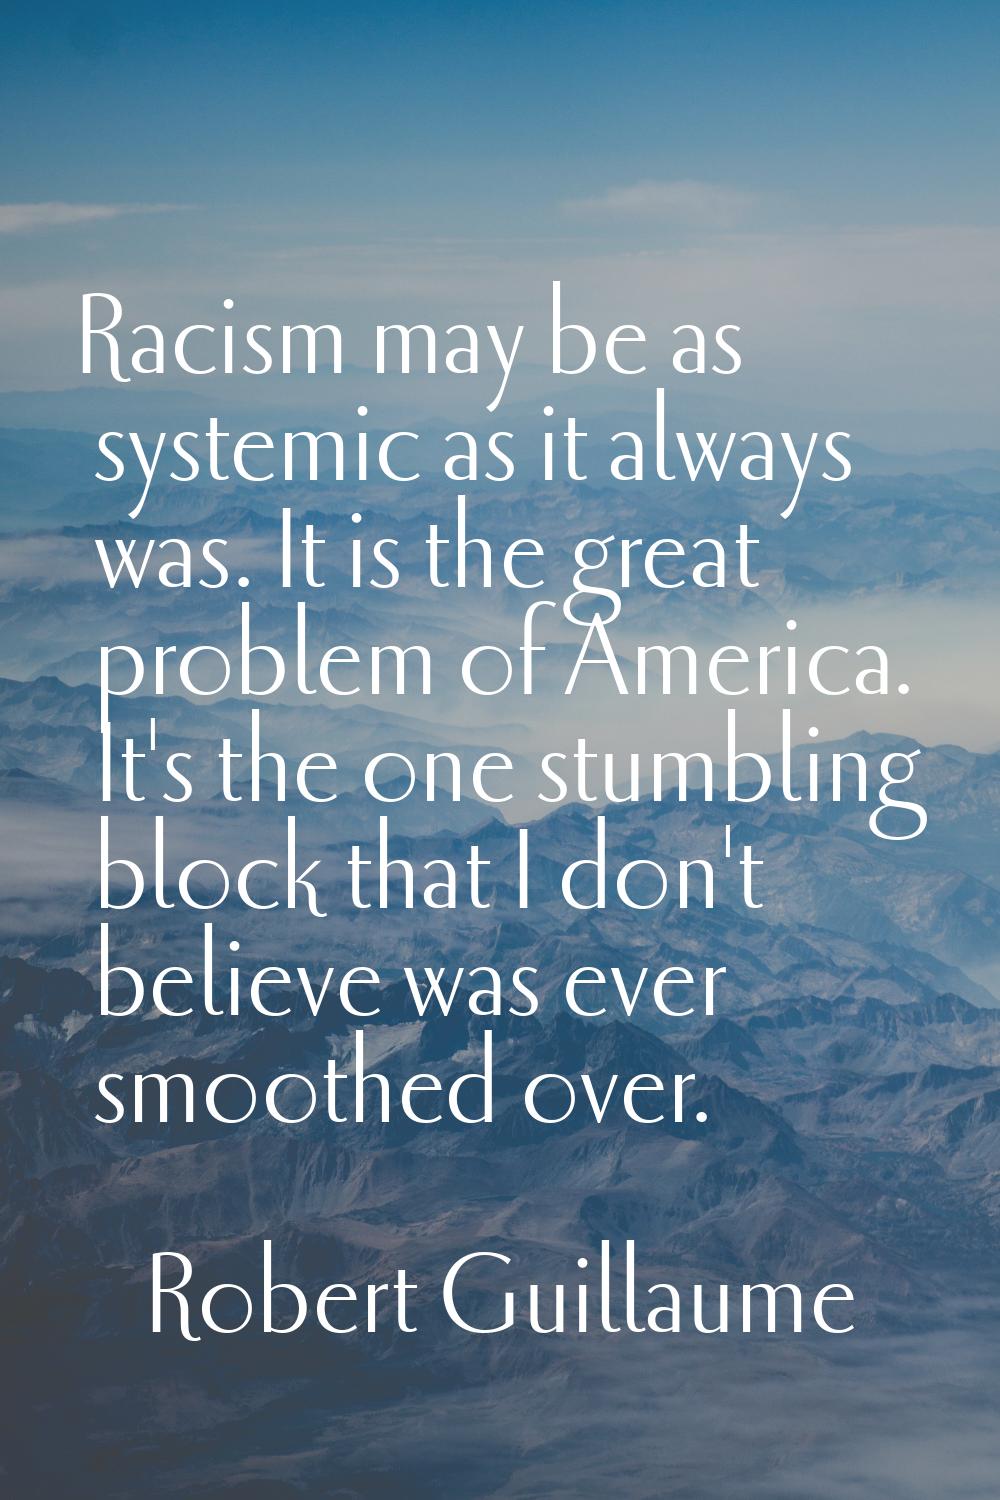 Racism may be as systemic as it always was. It is the great problem of America. It's the one stumbl